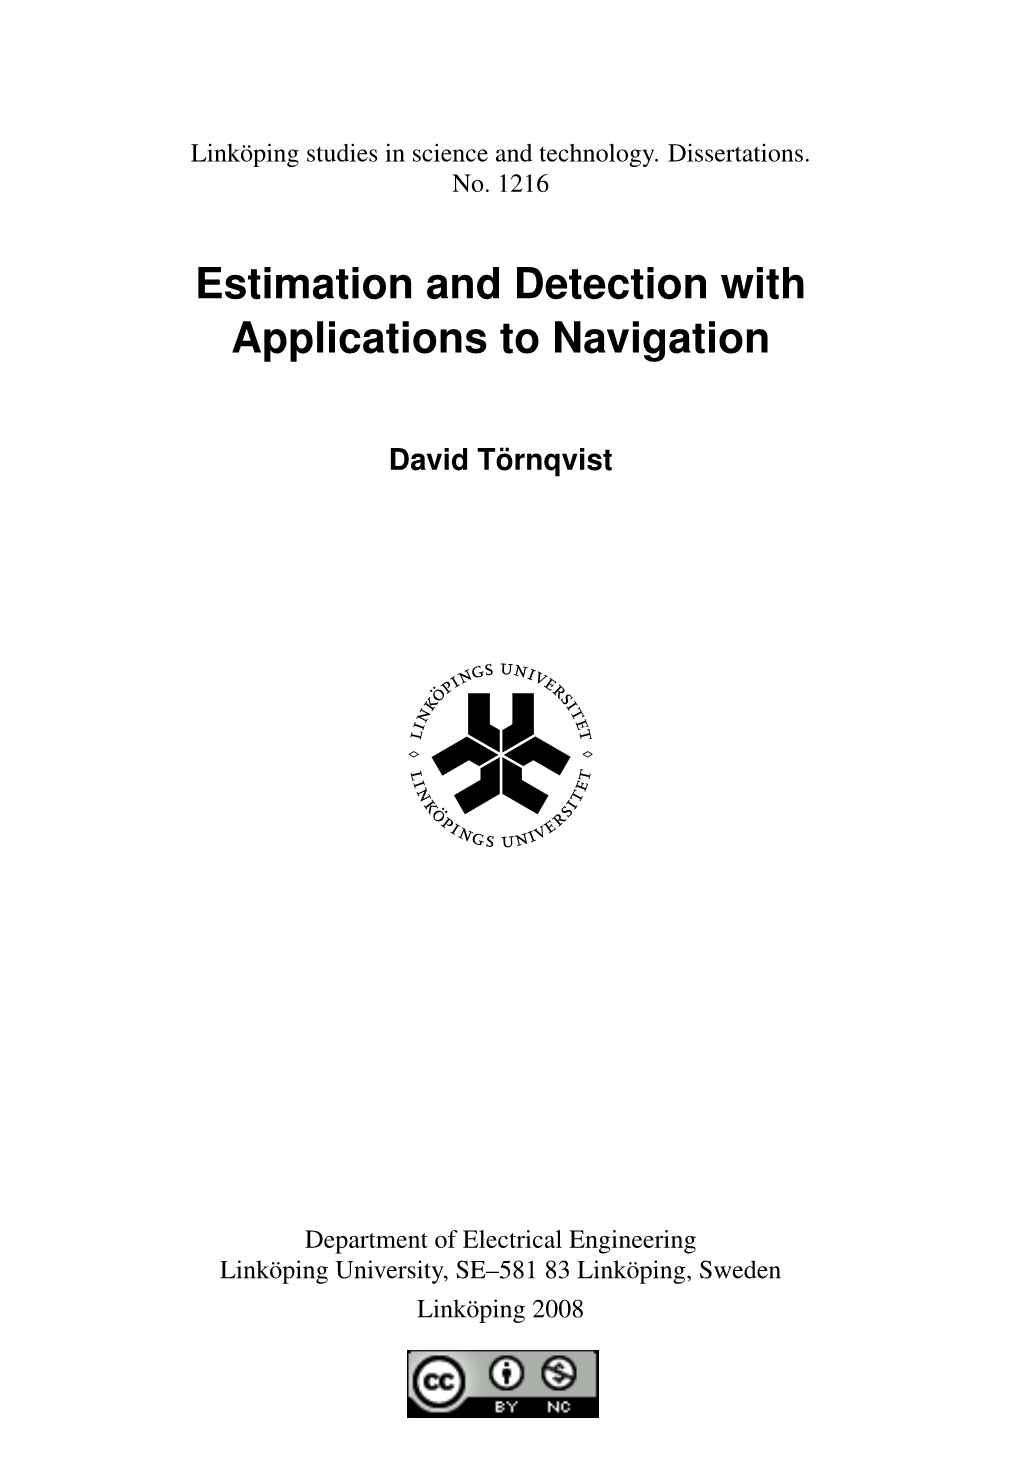 Estimation and Detection with Applications to Navigation